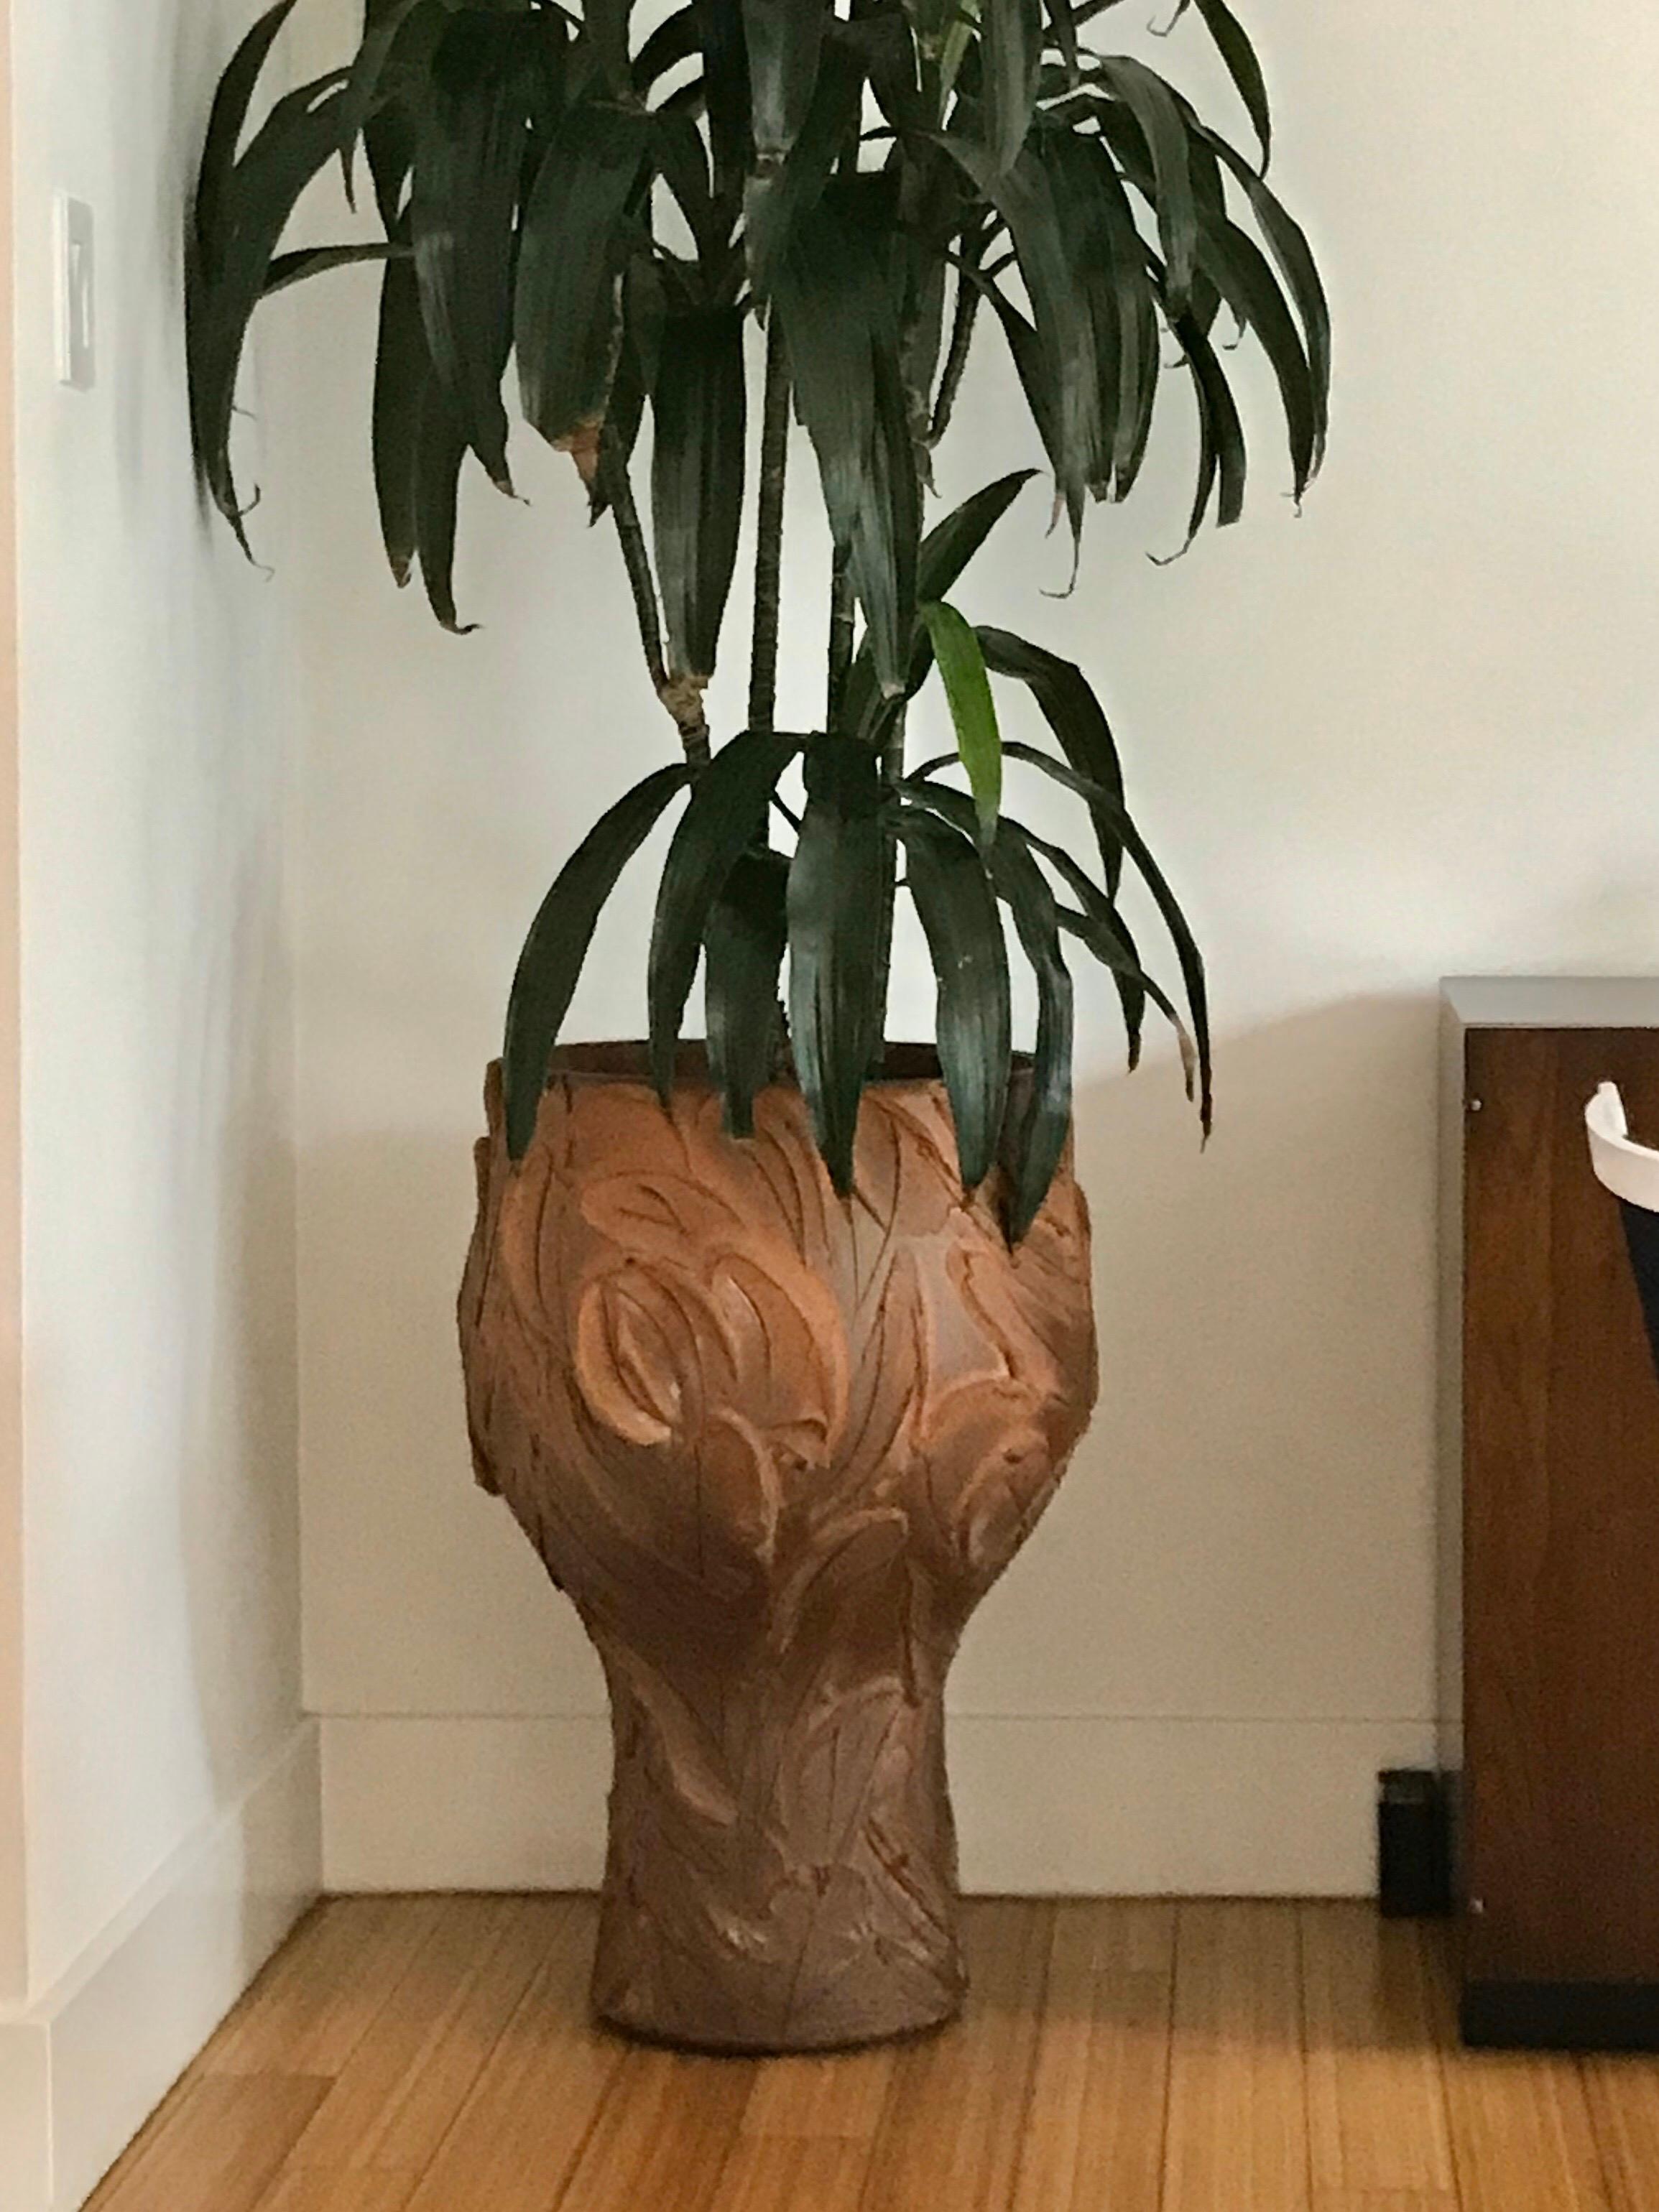 A great California design planter as art.
Handcrafted reduction fired natural stoneware of Cressey's own 